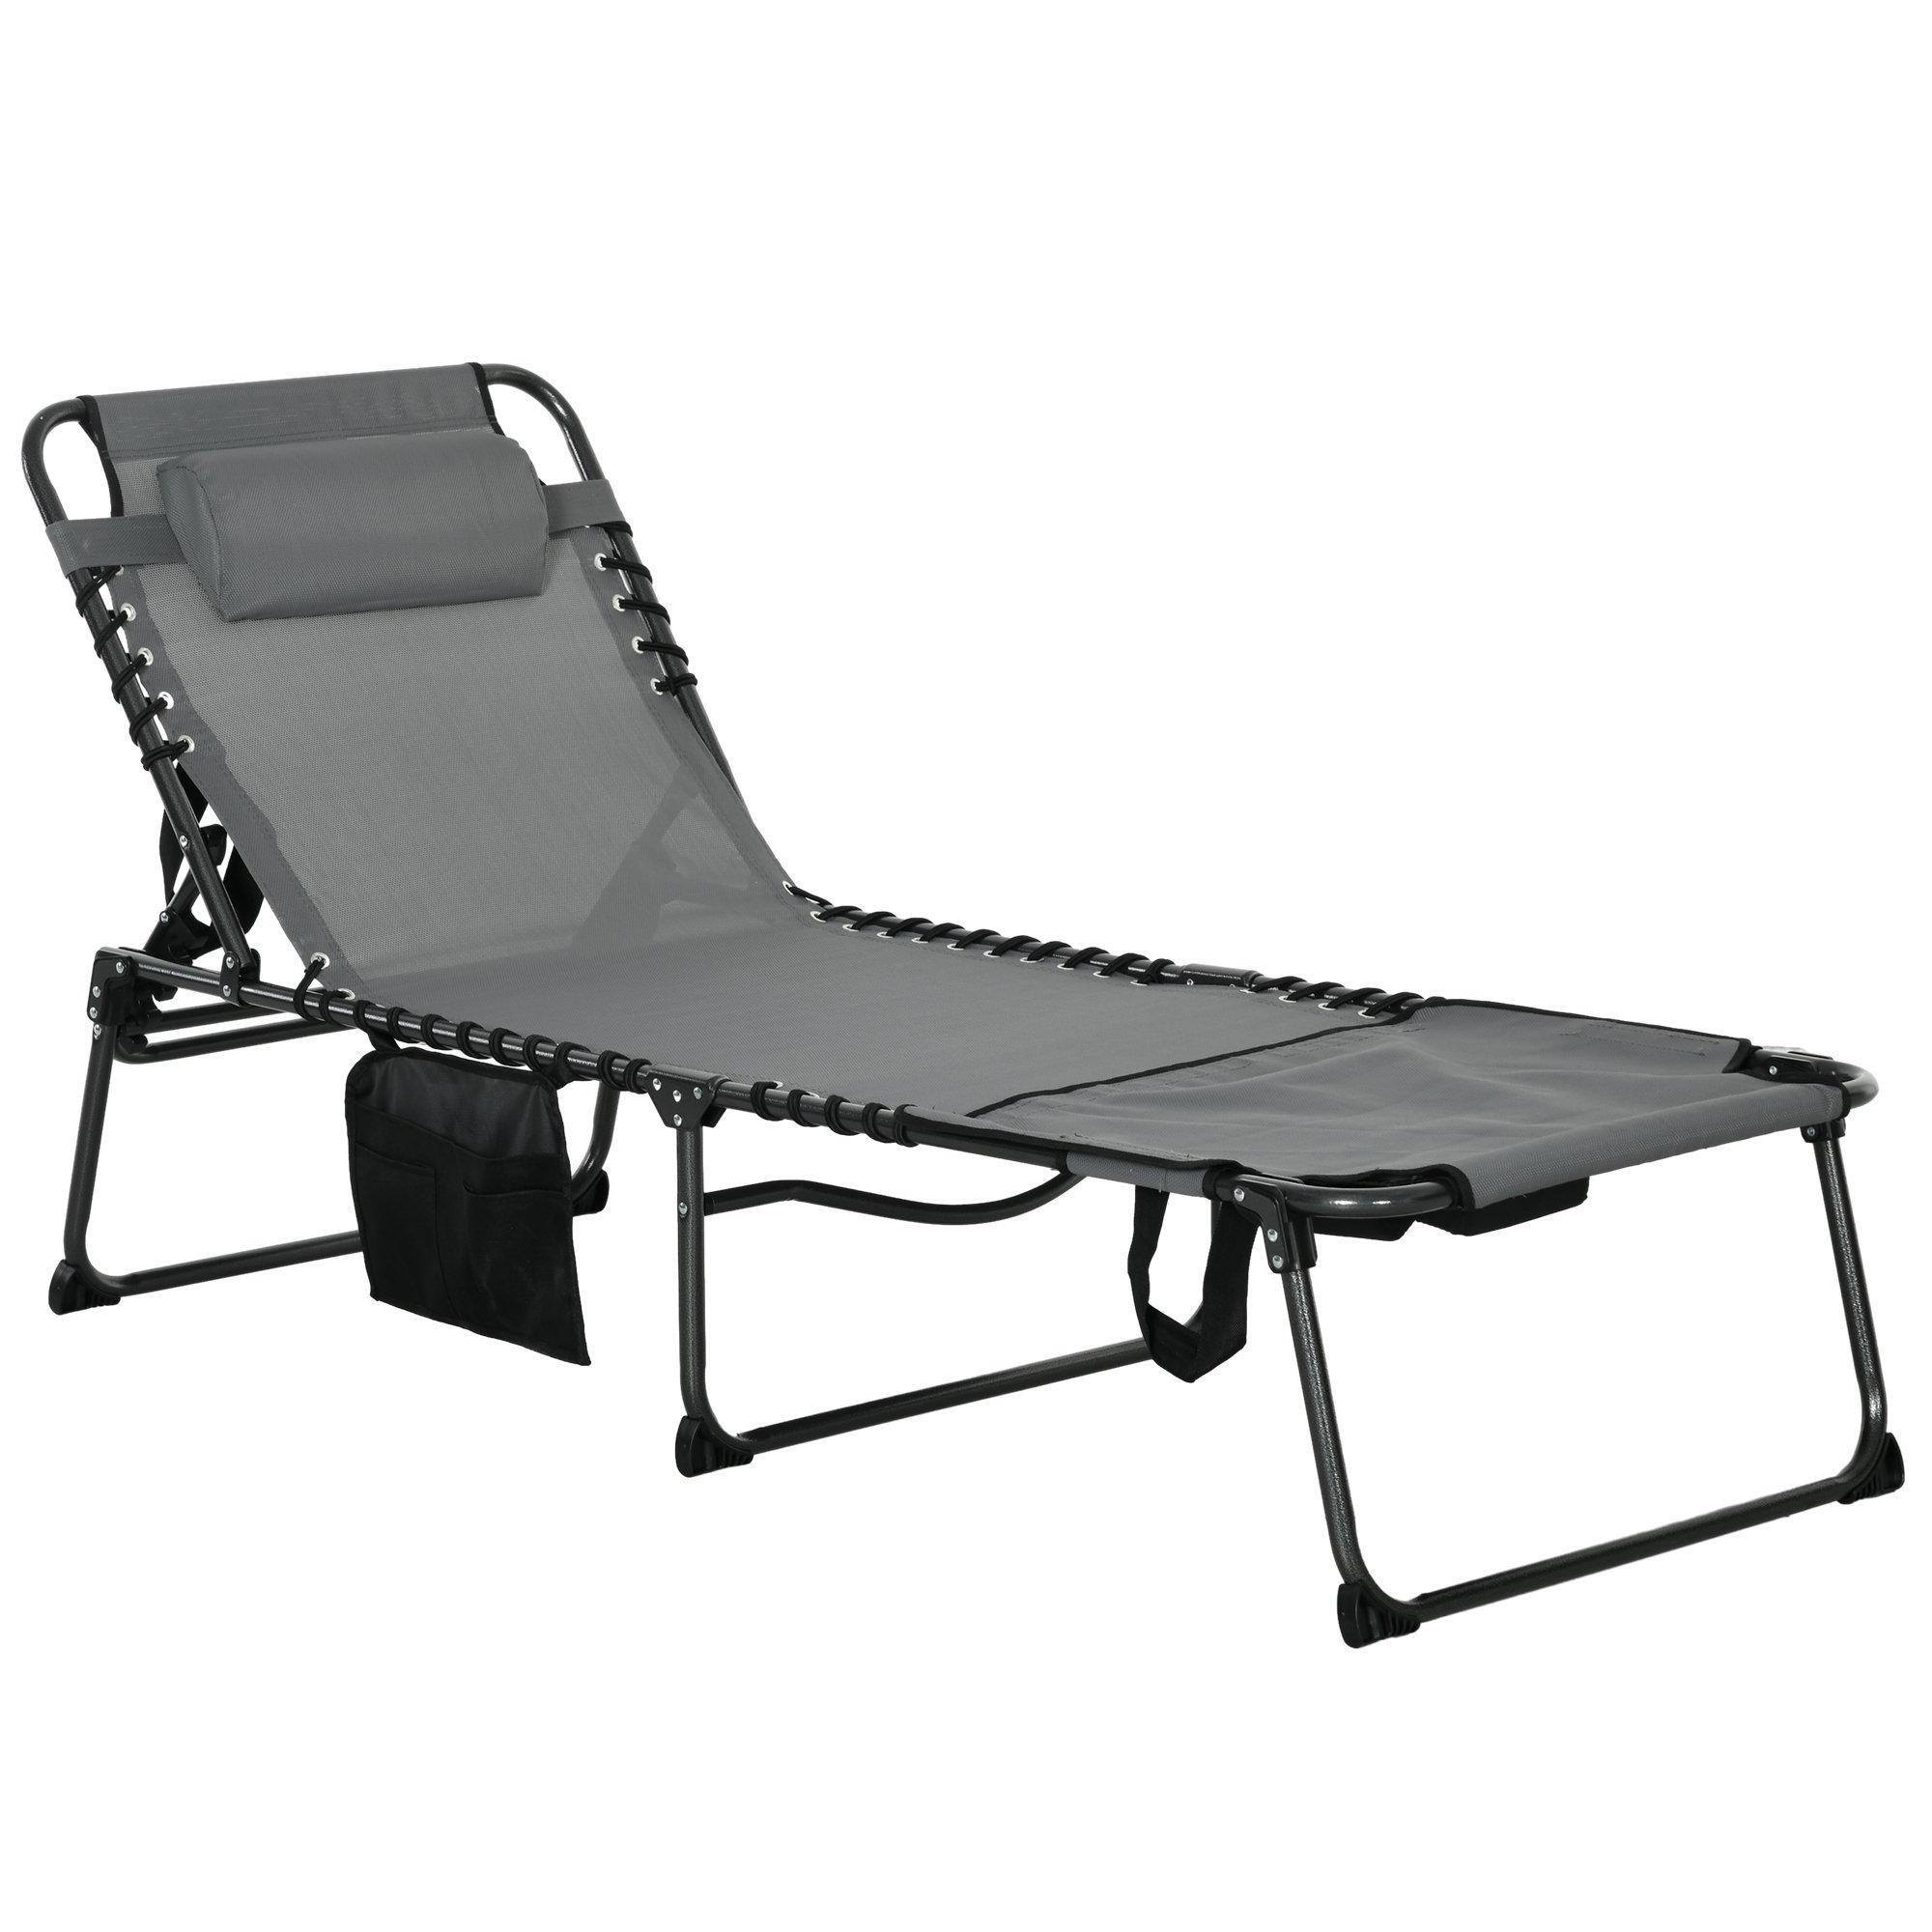 Folding Sun Lounge with Reclining Back, Outdoor Sun Lounge with Reading Hole - image 1